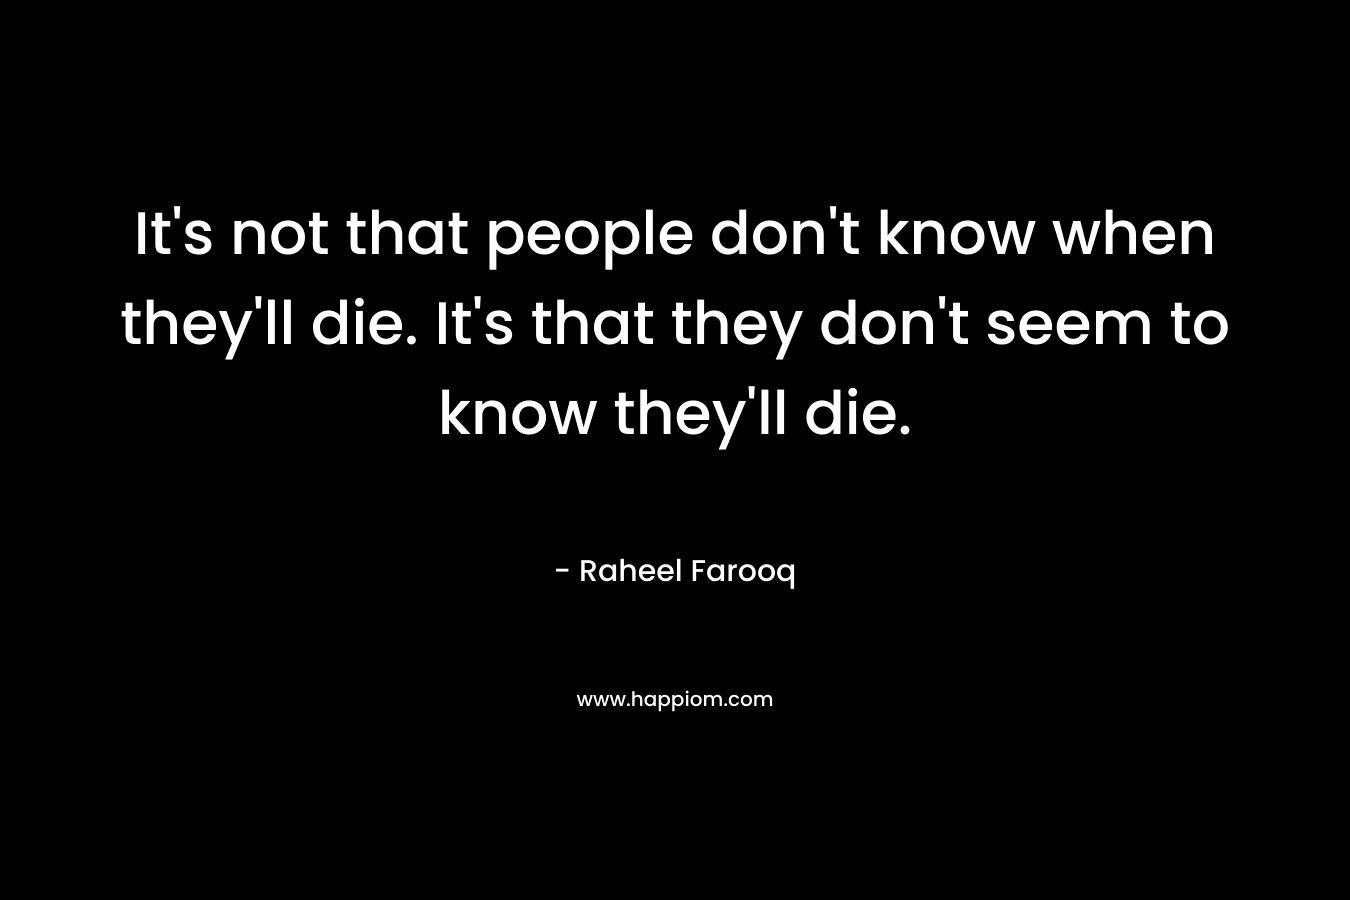 It's not that people don't know when they'll die. It's that they don't seem to know they'll die.